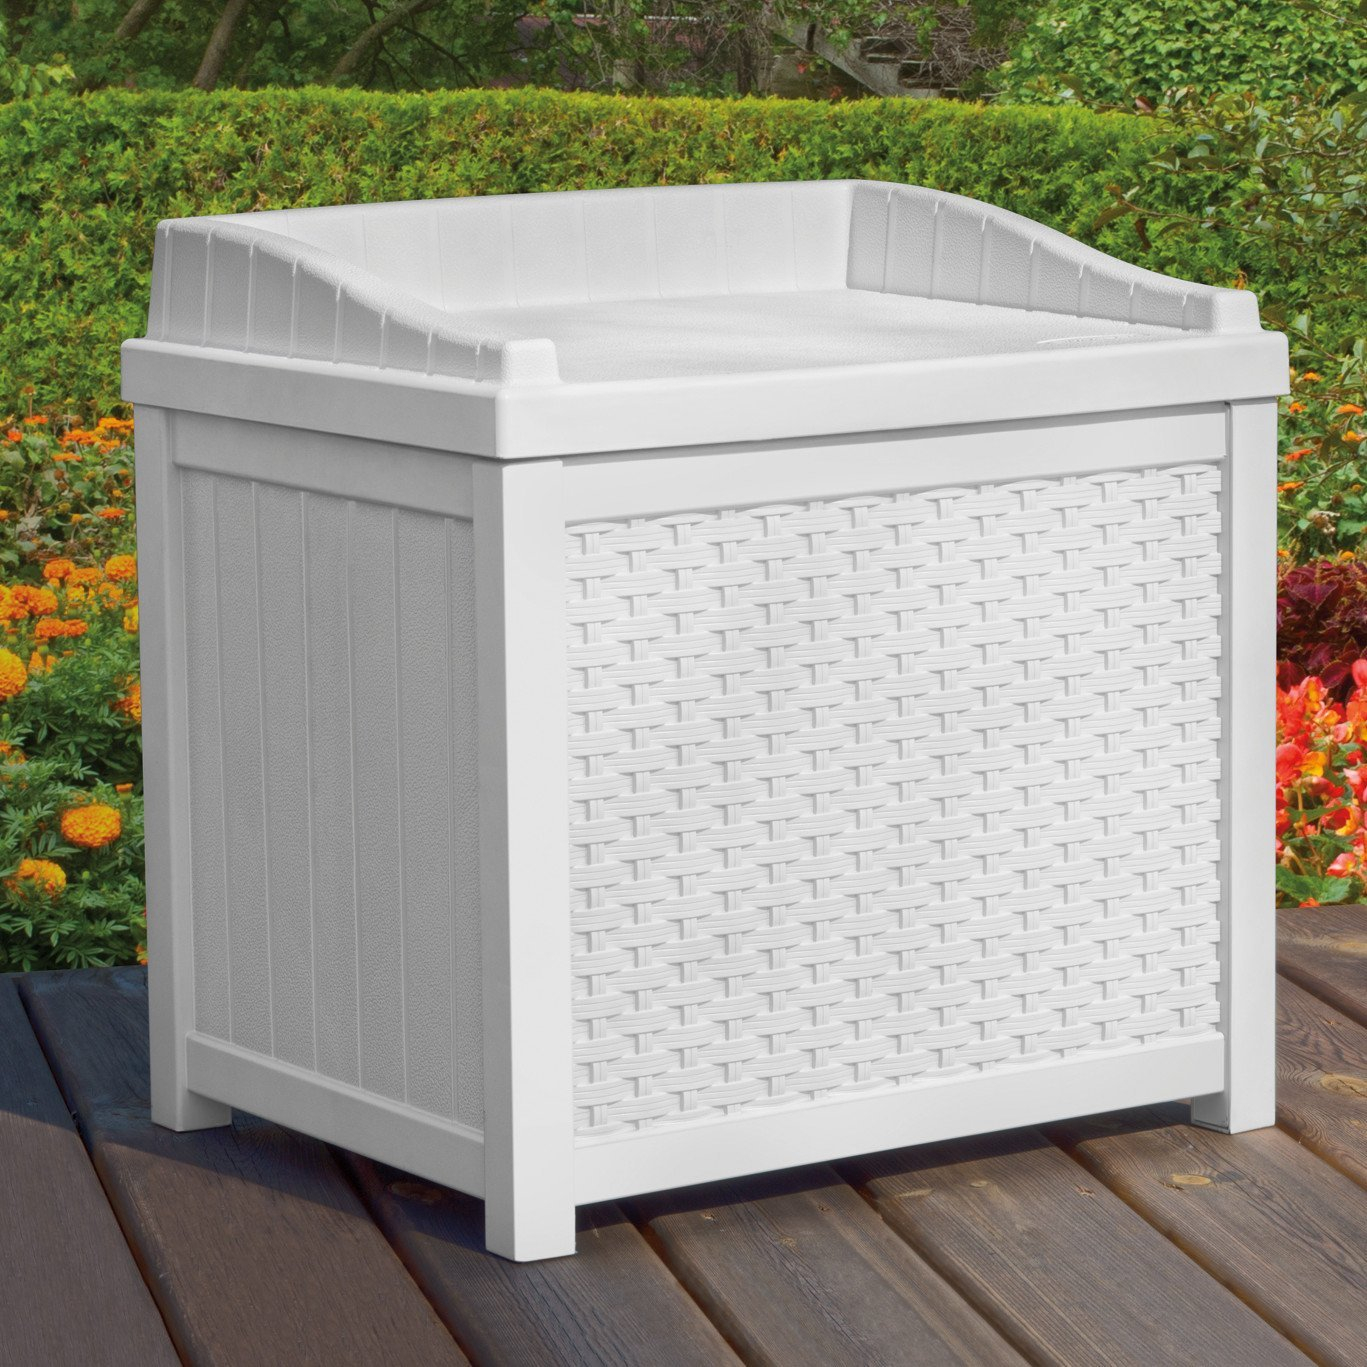 Tips Ideas Interesting Outdoor Storage Design With Deck Box With within size 1367 X 1367